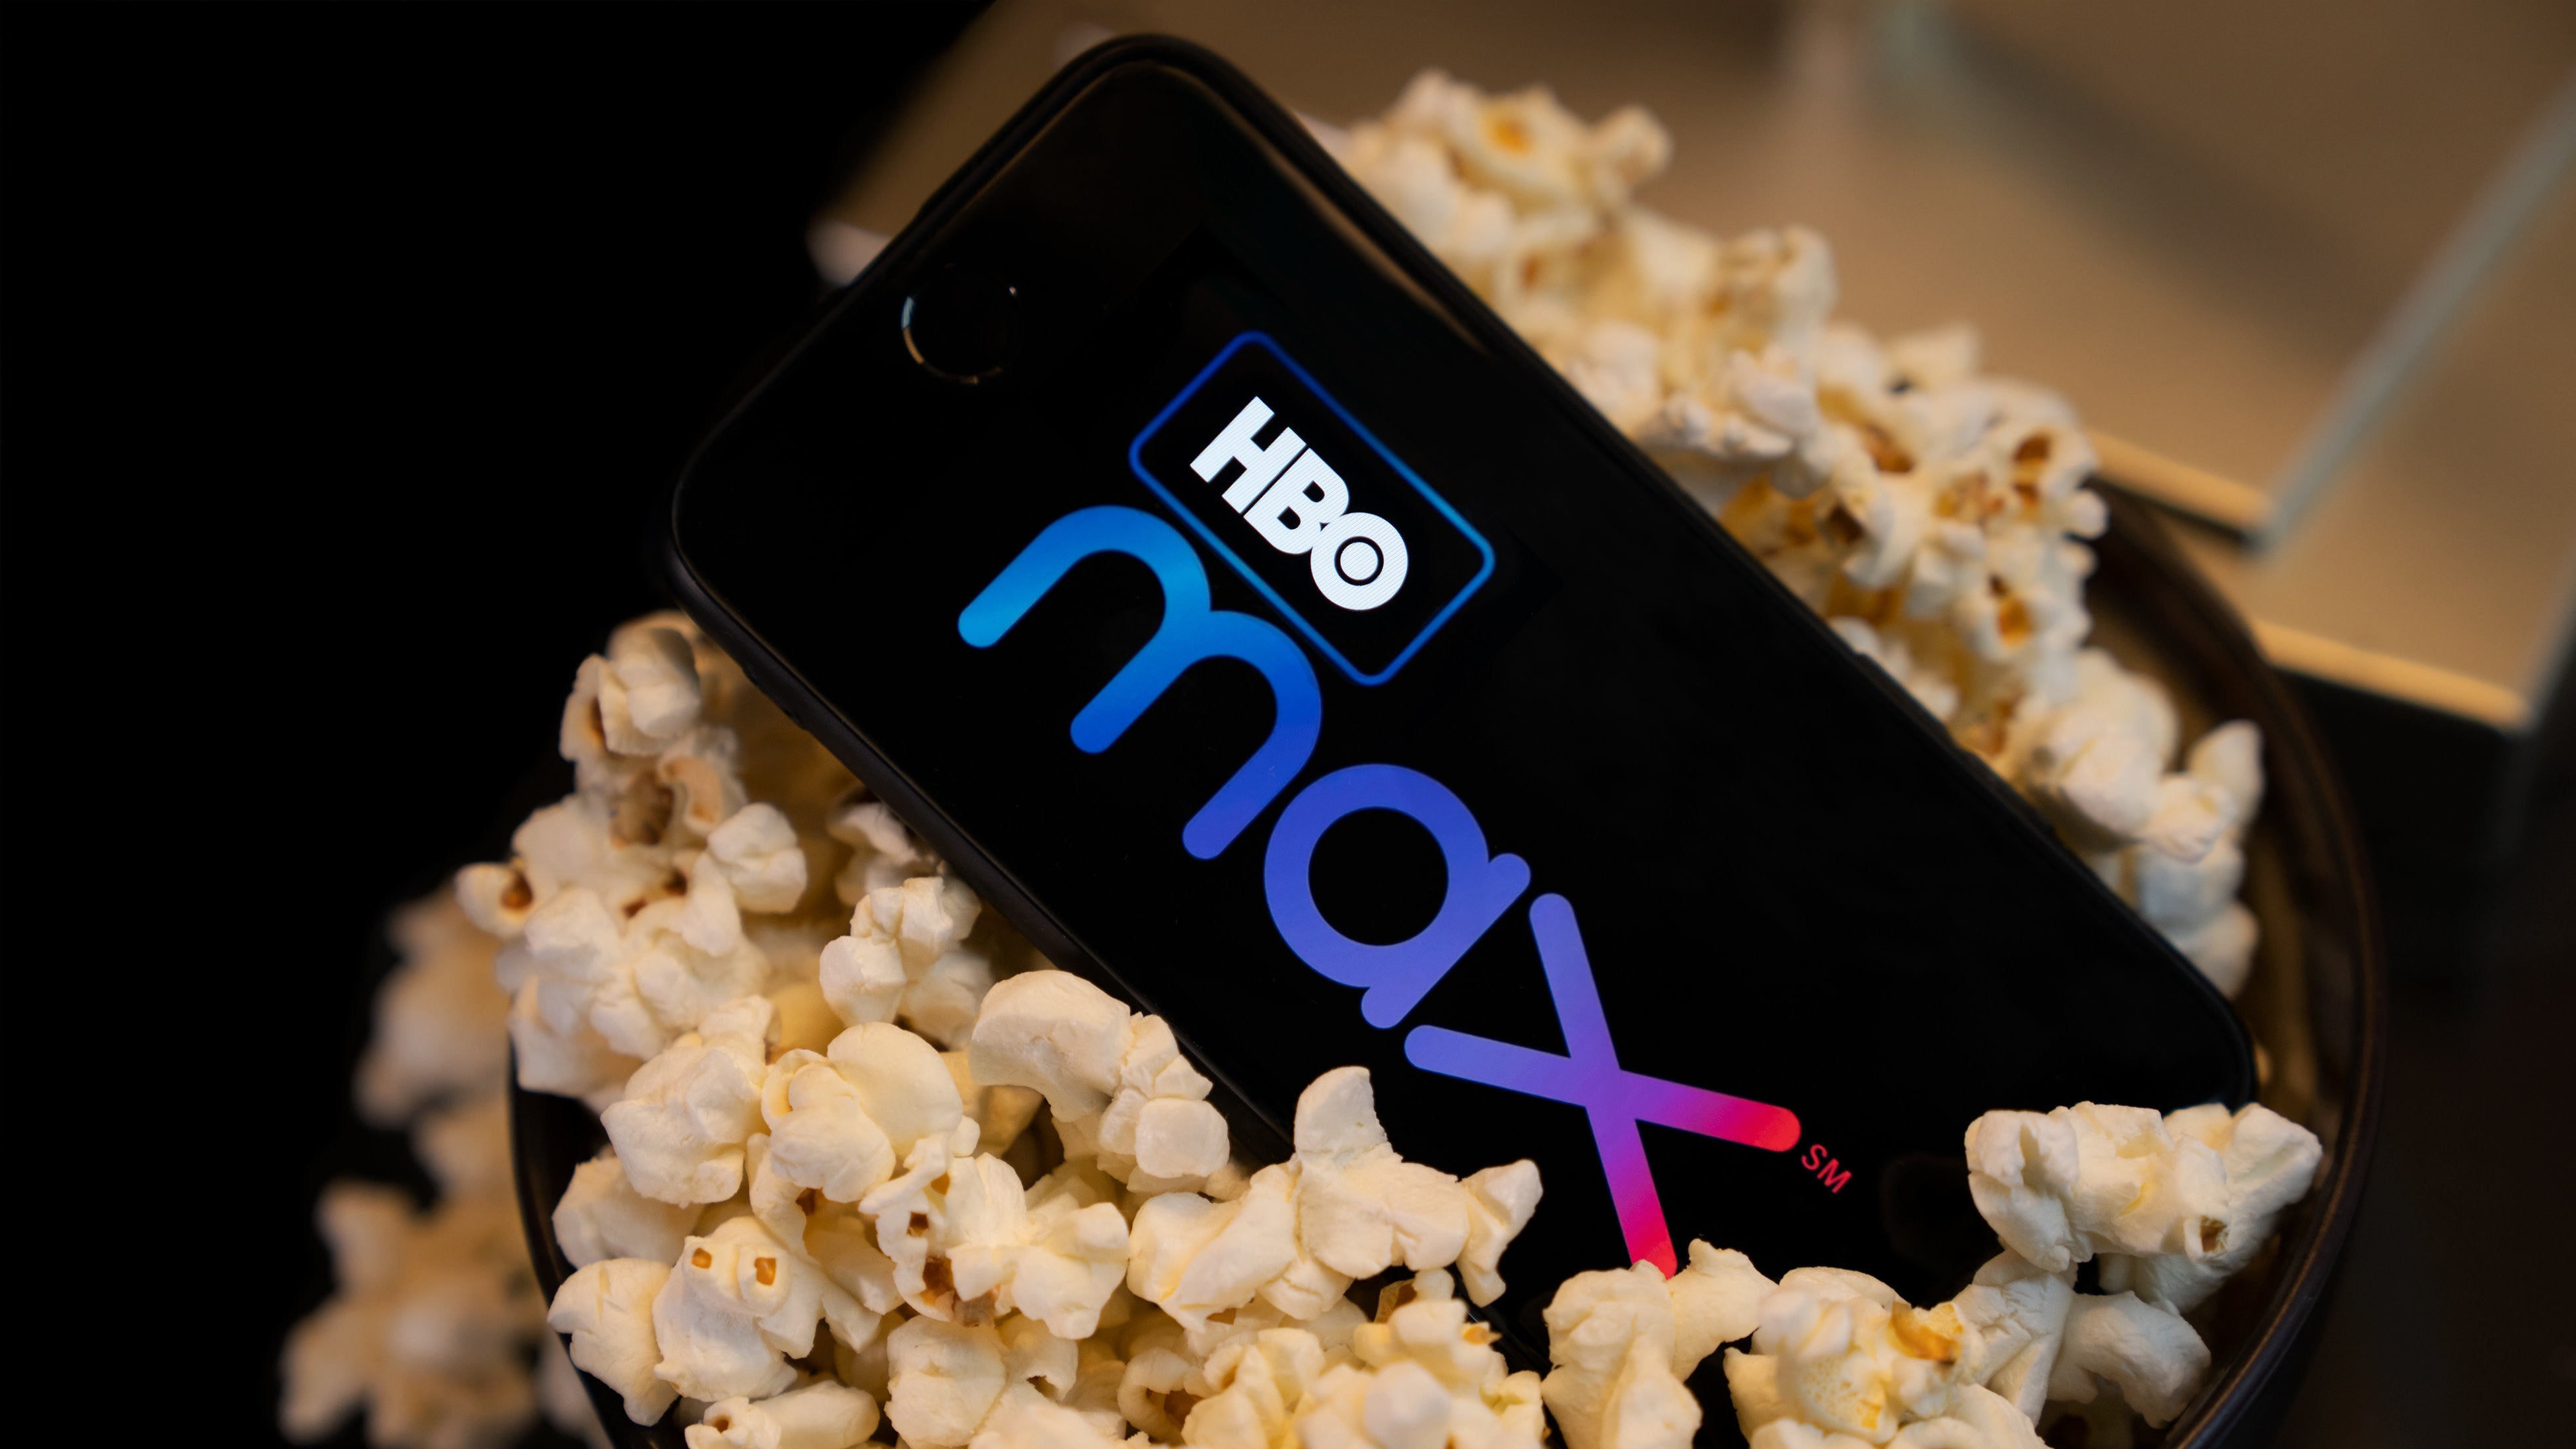 HBO Now Users Should Switch To An HBO-Billed Plan If They Want HBO Max